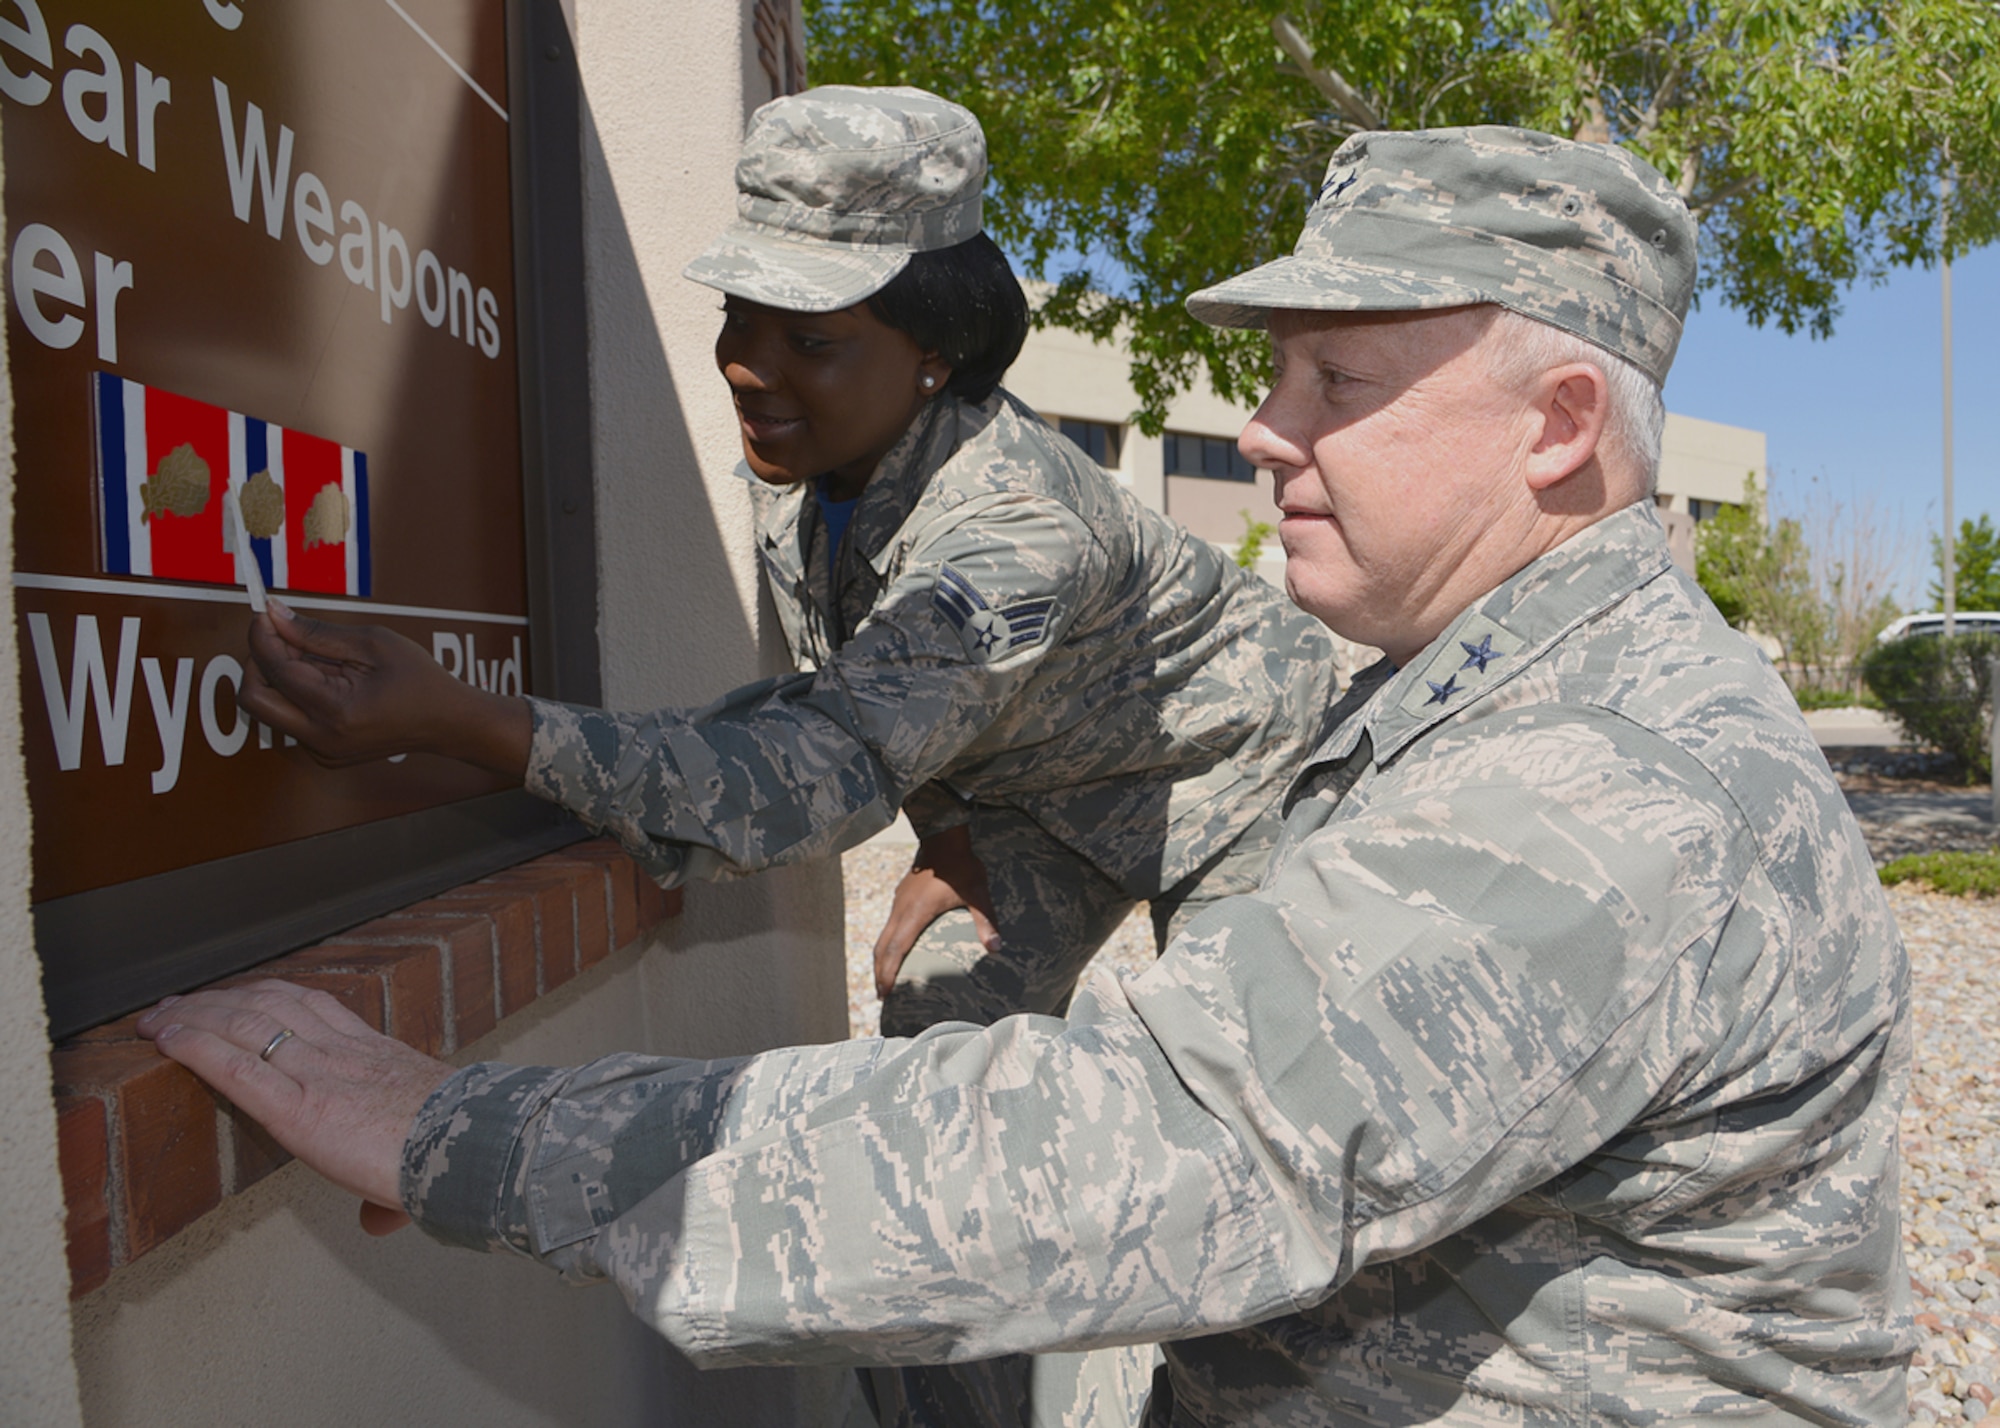 Maj. Gen. Scott W. Jansson, Air Force Nuclear Weapons Center commander and its most senior member, and Senior Airman Mychavia T. Harris, the center’s most junior member in 2015, affix the third oak leaf cluster to the Air Force Organizational Excellence Award ribbon on the AFNWC headquarters’ sign at Kirtland AFB, New Mexico.  The center was recognized for its 2015 achievements and accomplishments in nuclear materiel management in support of the nuclear deterrence mission. 